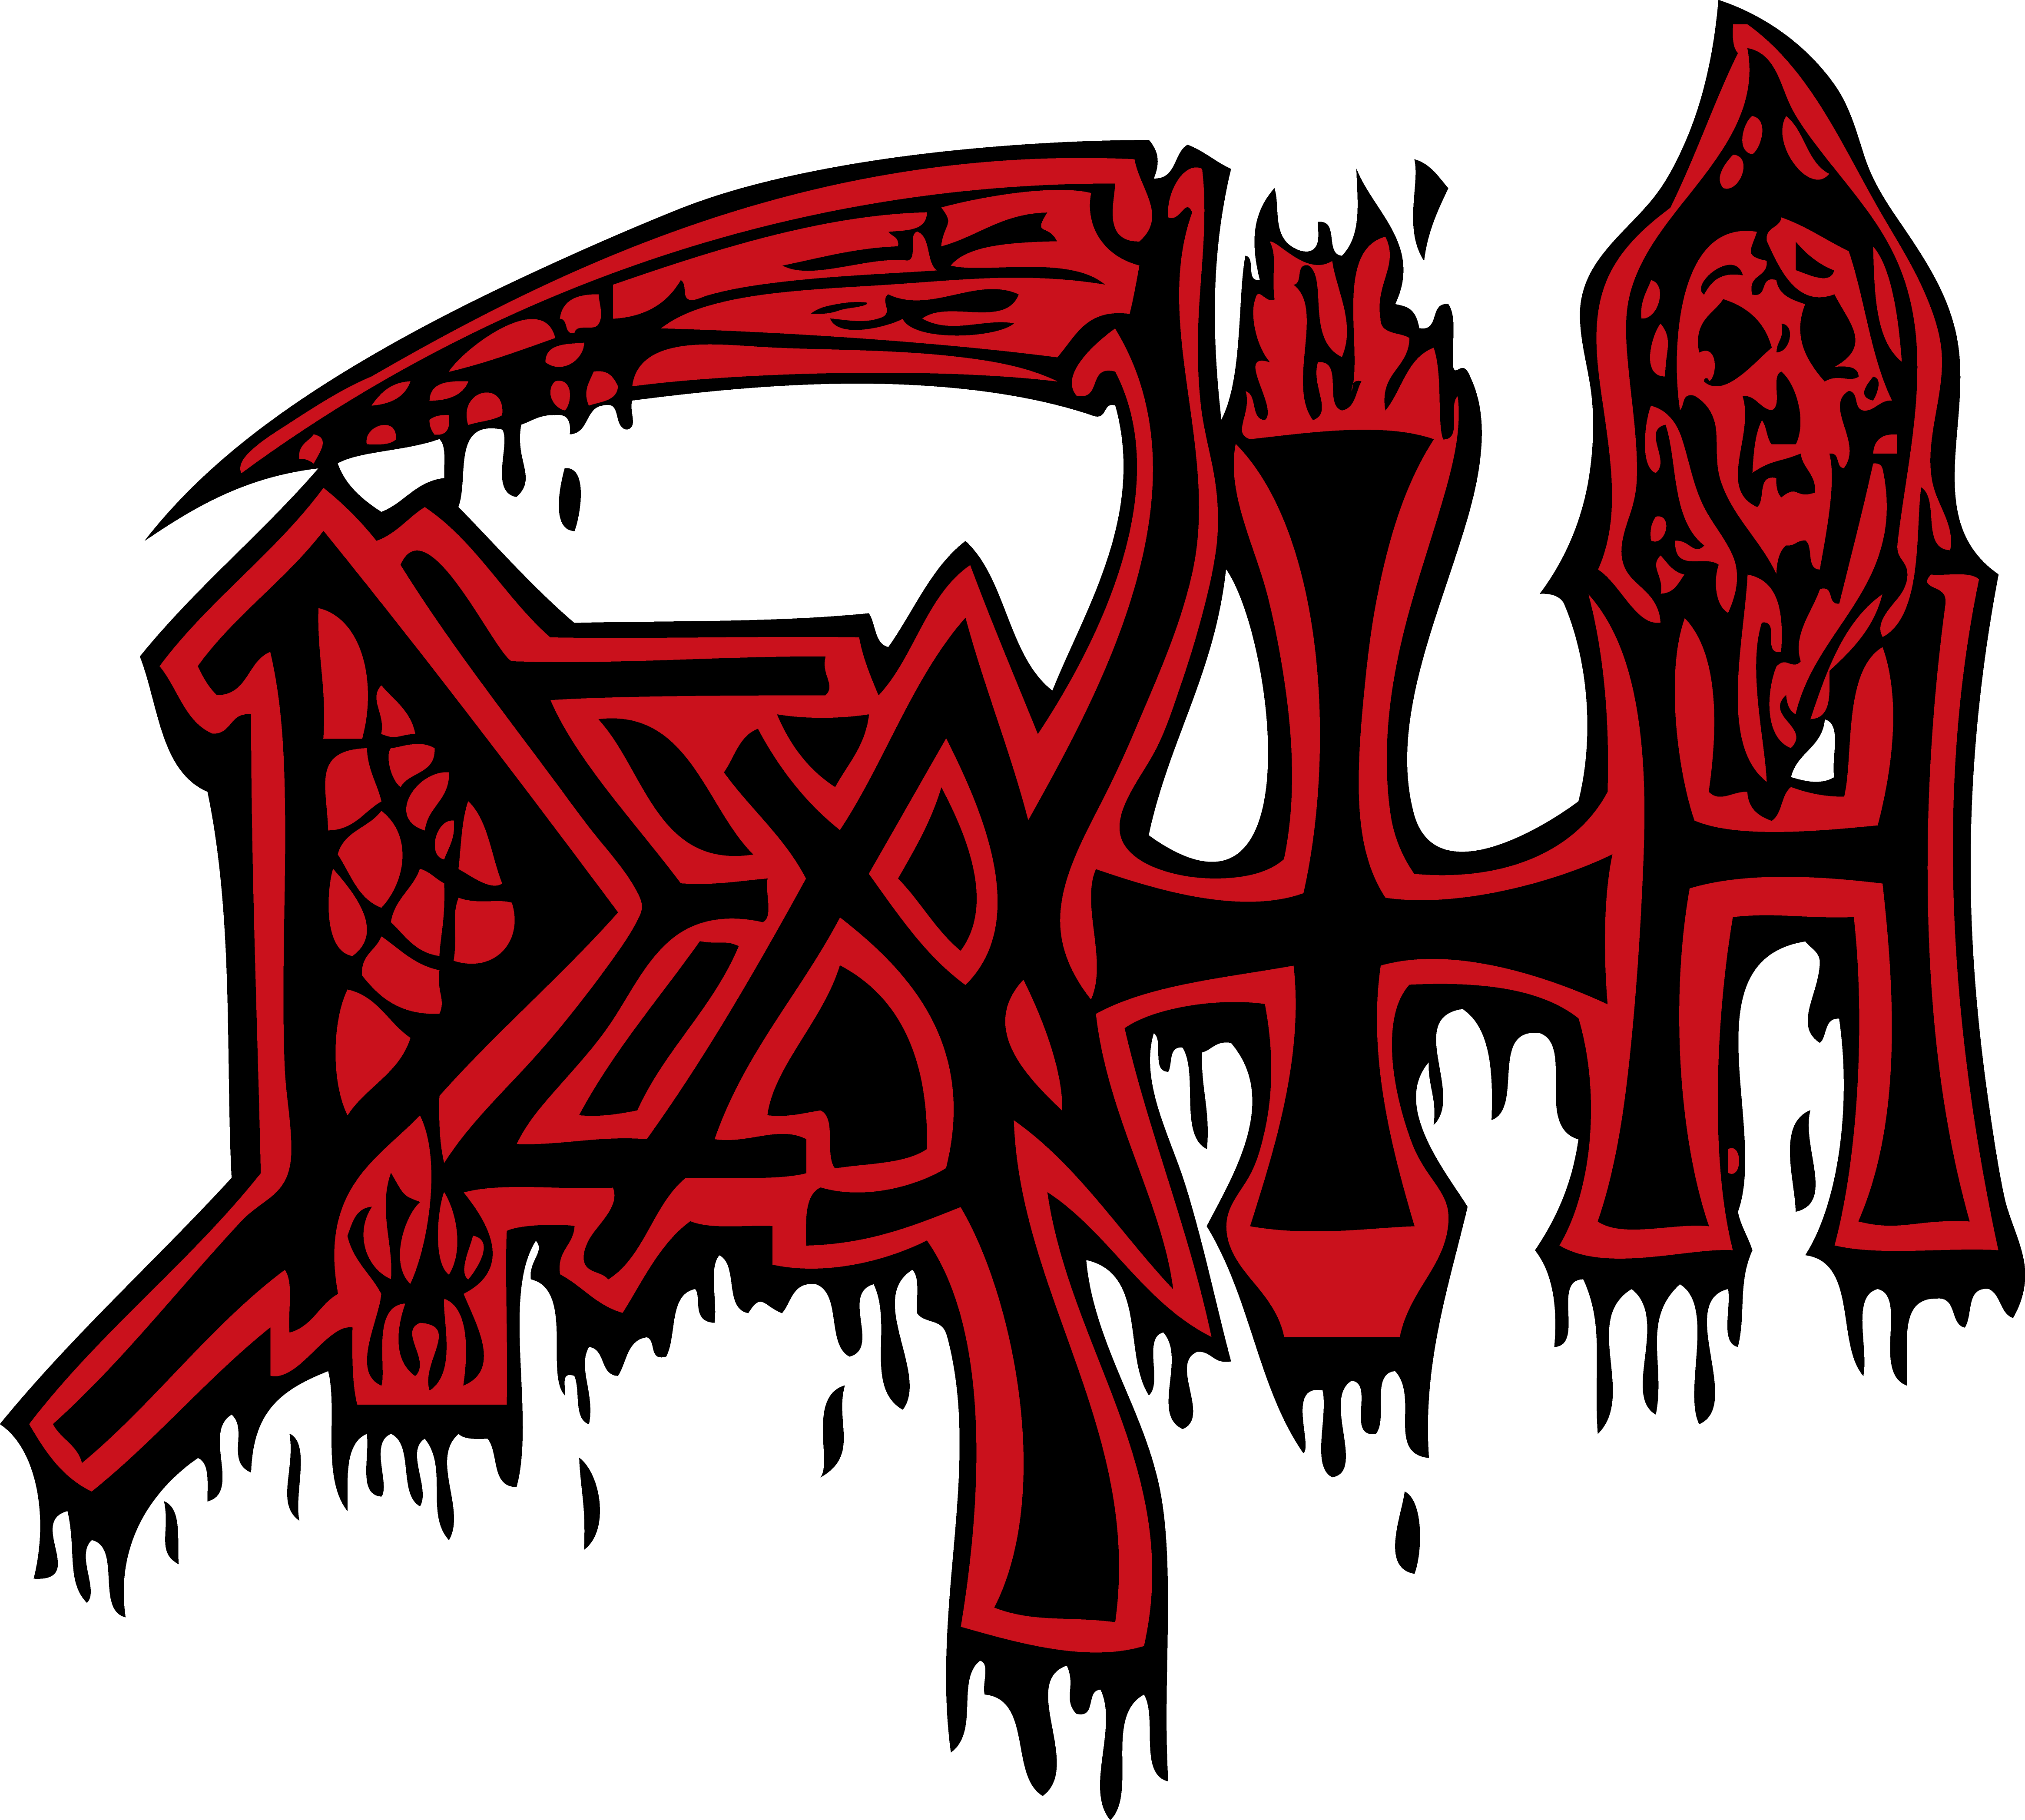 Cool Band Logo - Which metal band has the coolest logo? : Metal